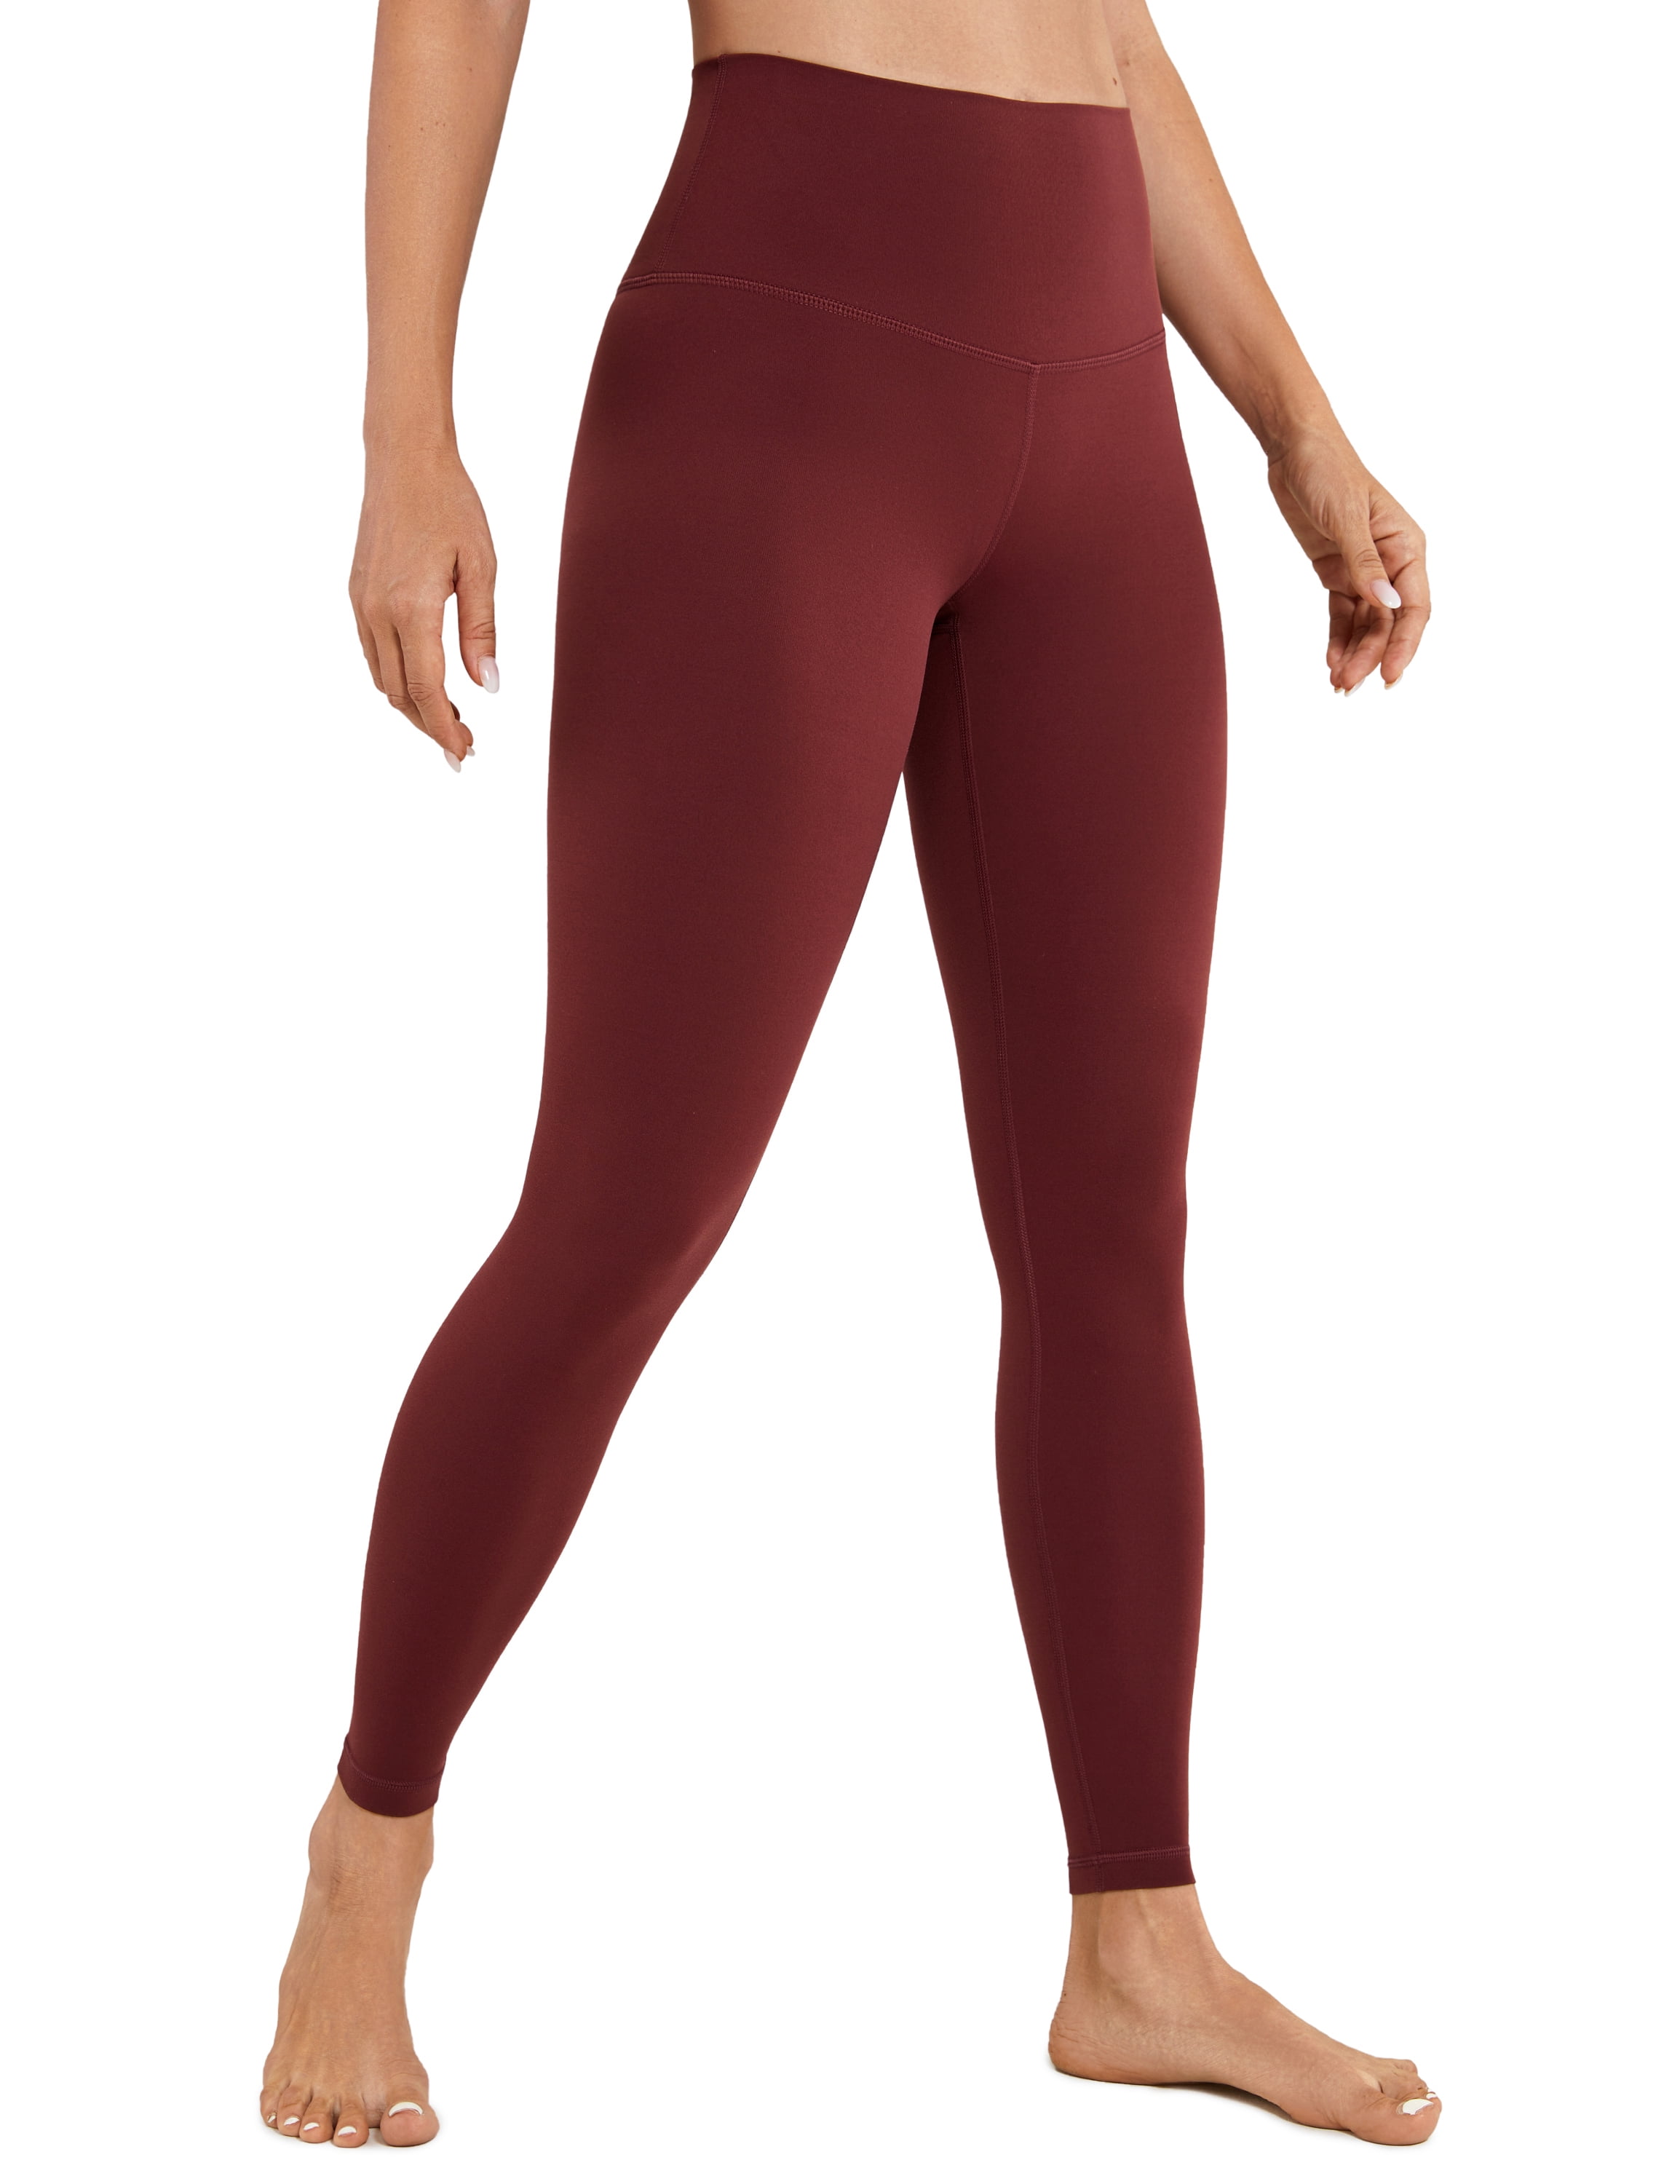 Buy CRZ YOGA Women's Butterluxe Yoga Leggings 25 Inches - High Waisted  Workout Leggings Buttery Soft Yoga Pants, Tornado, Small at